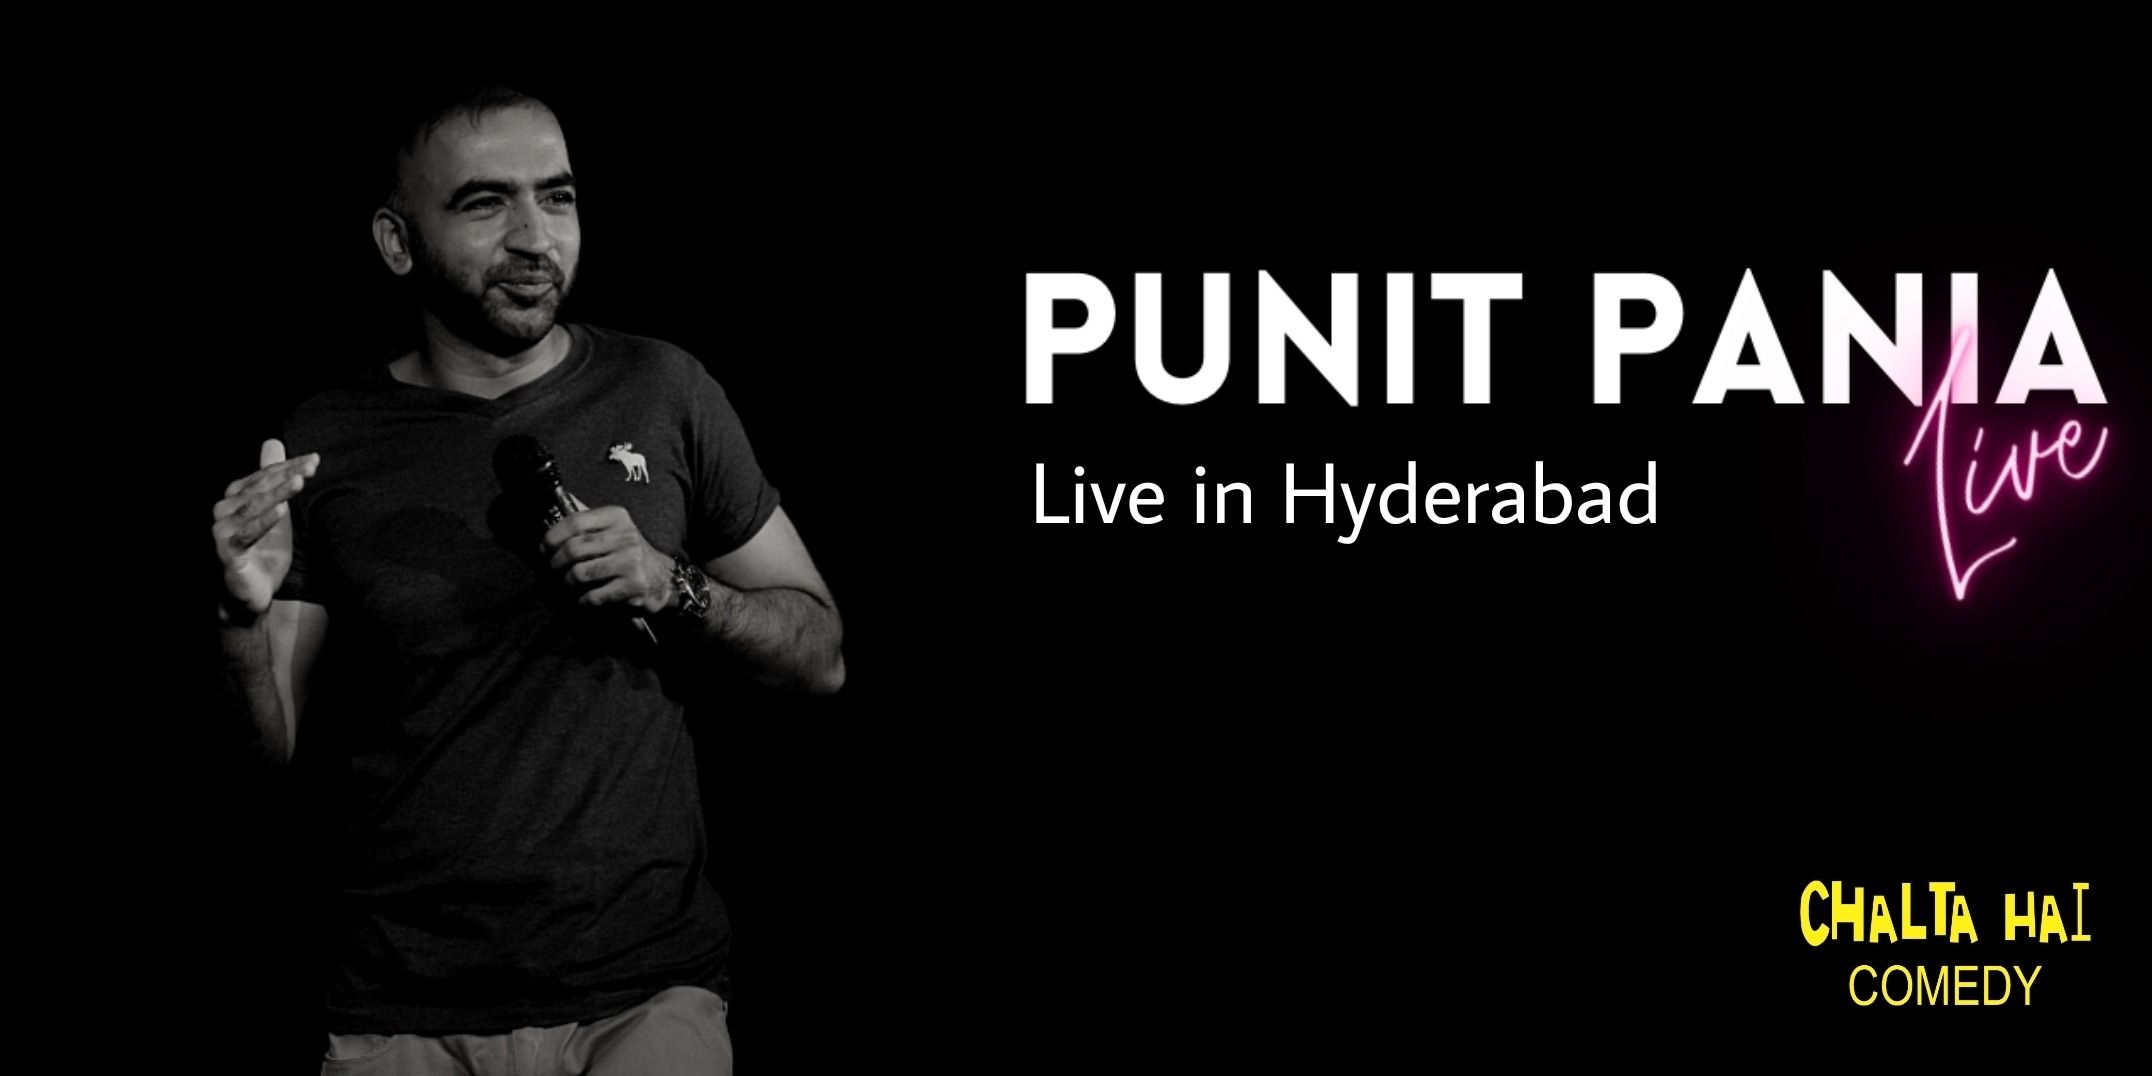 Punit Pania Live in Hyderabad